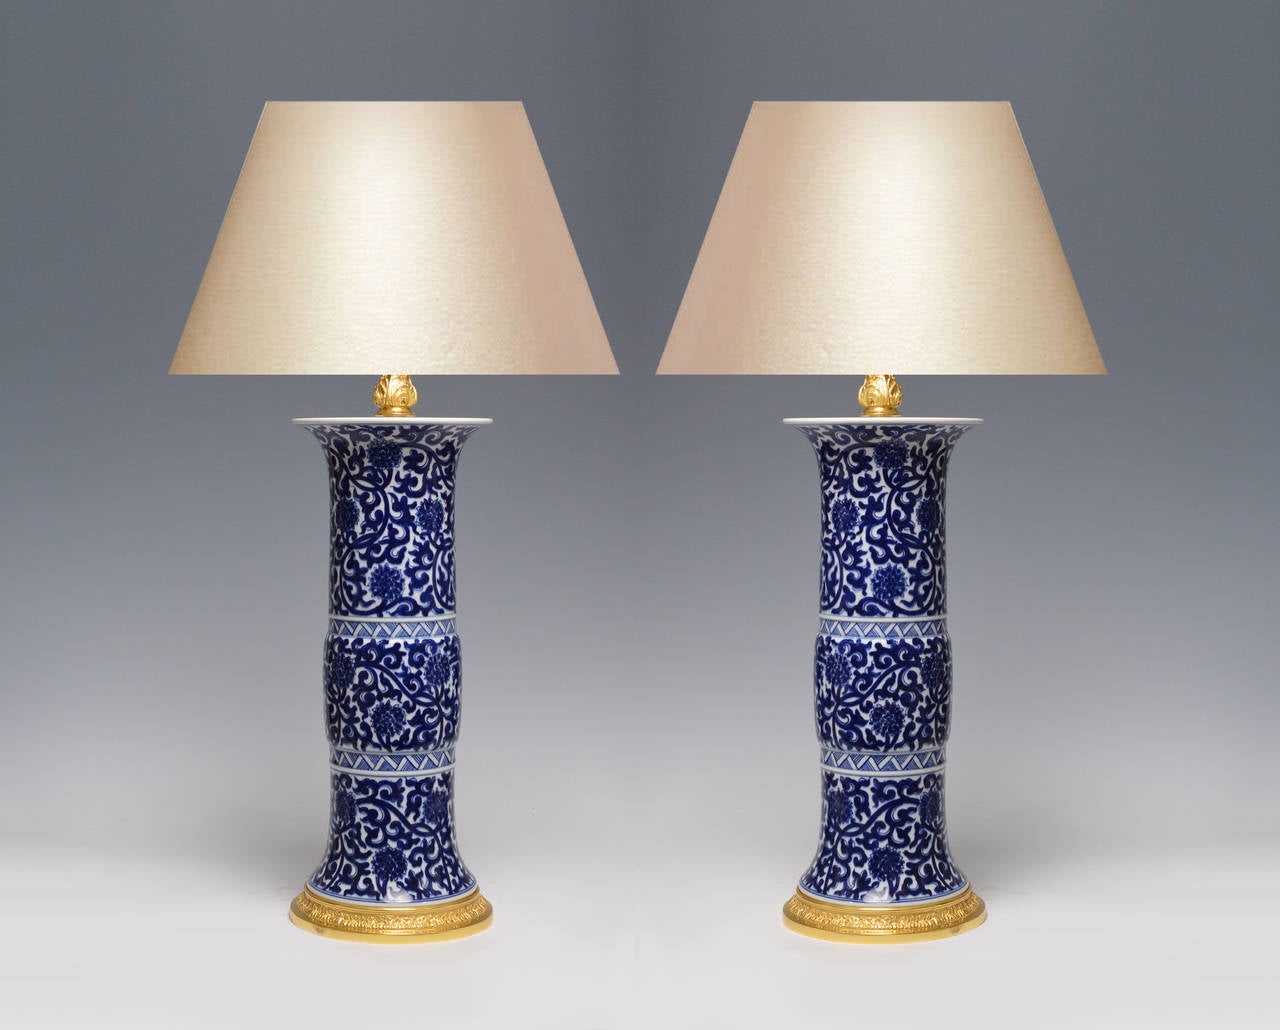 Pair of fine painted beaker form blue and white porcelain lamps with floral scroll decoration, gilt brass bases. 17.5